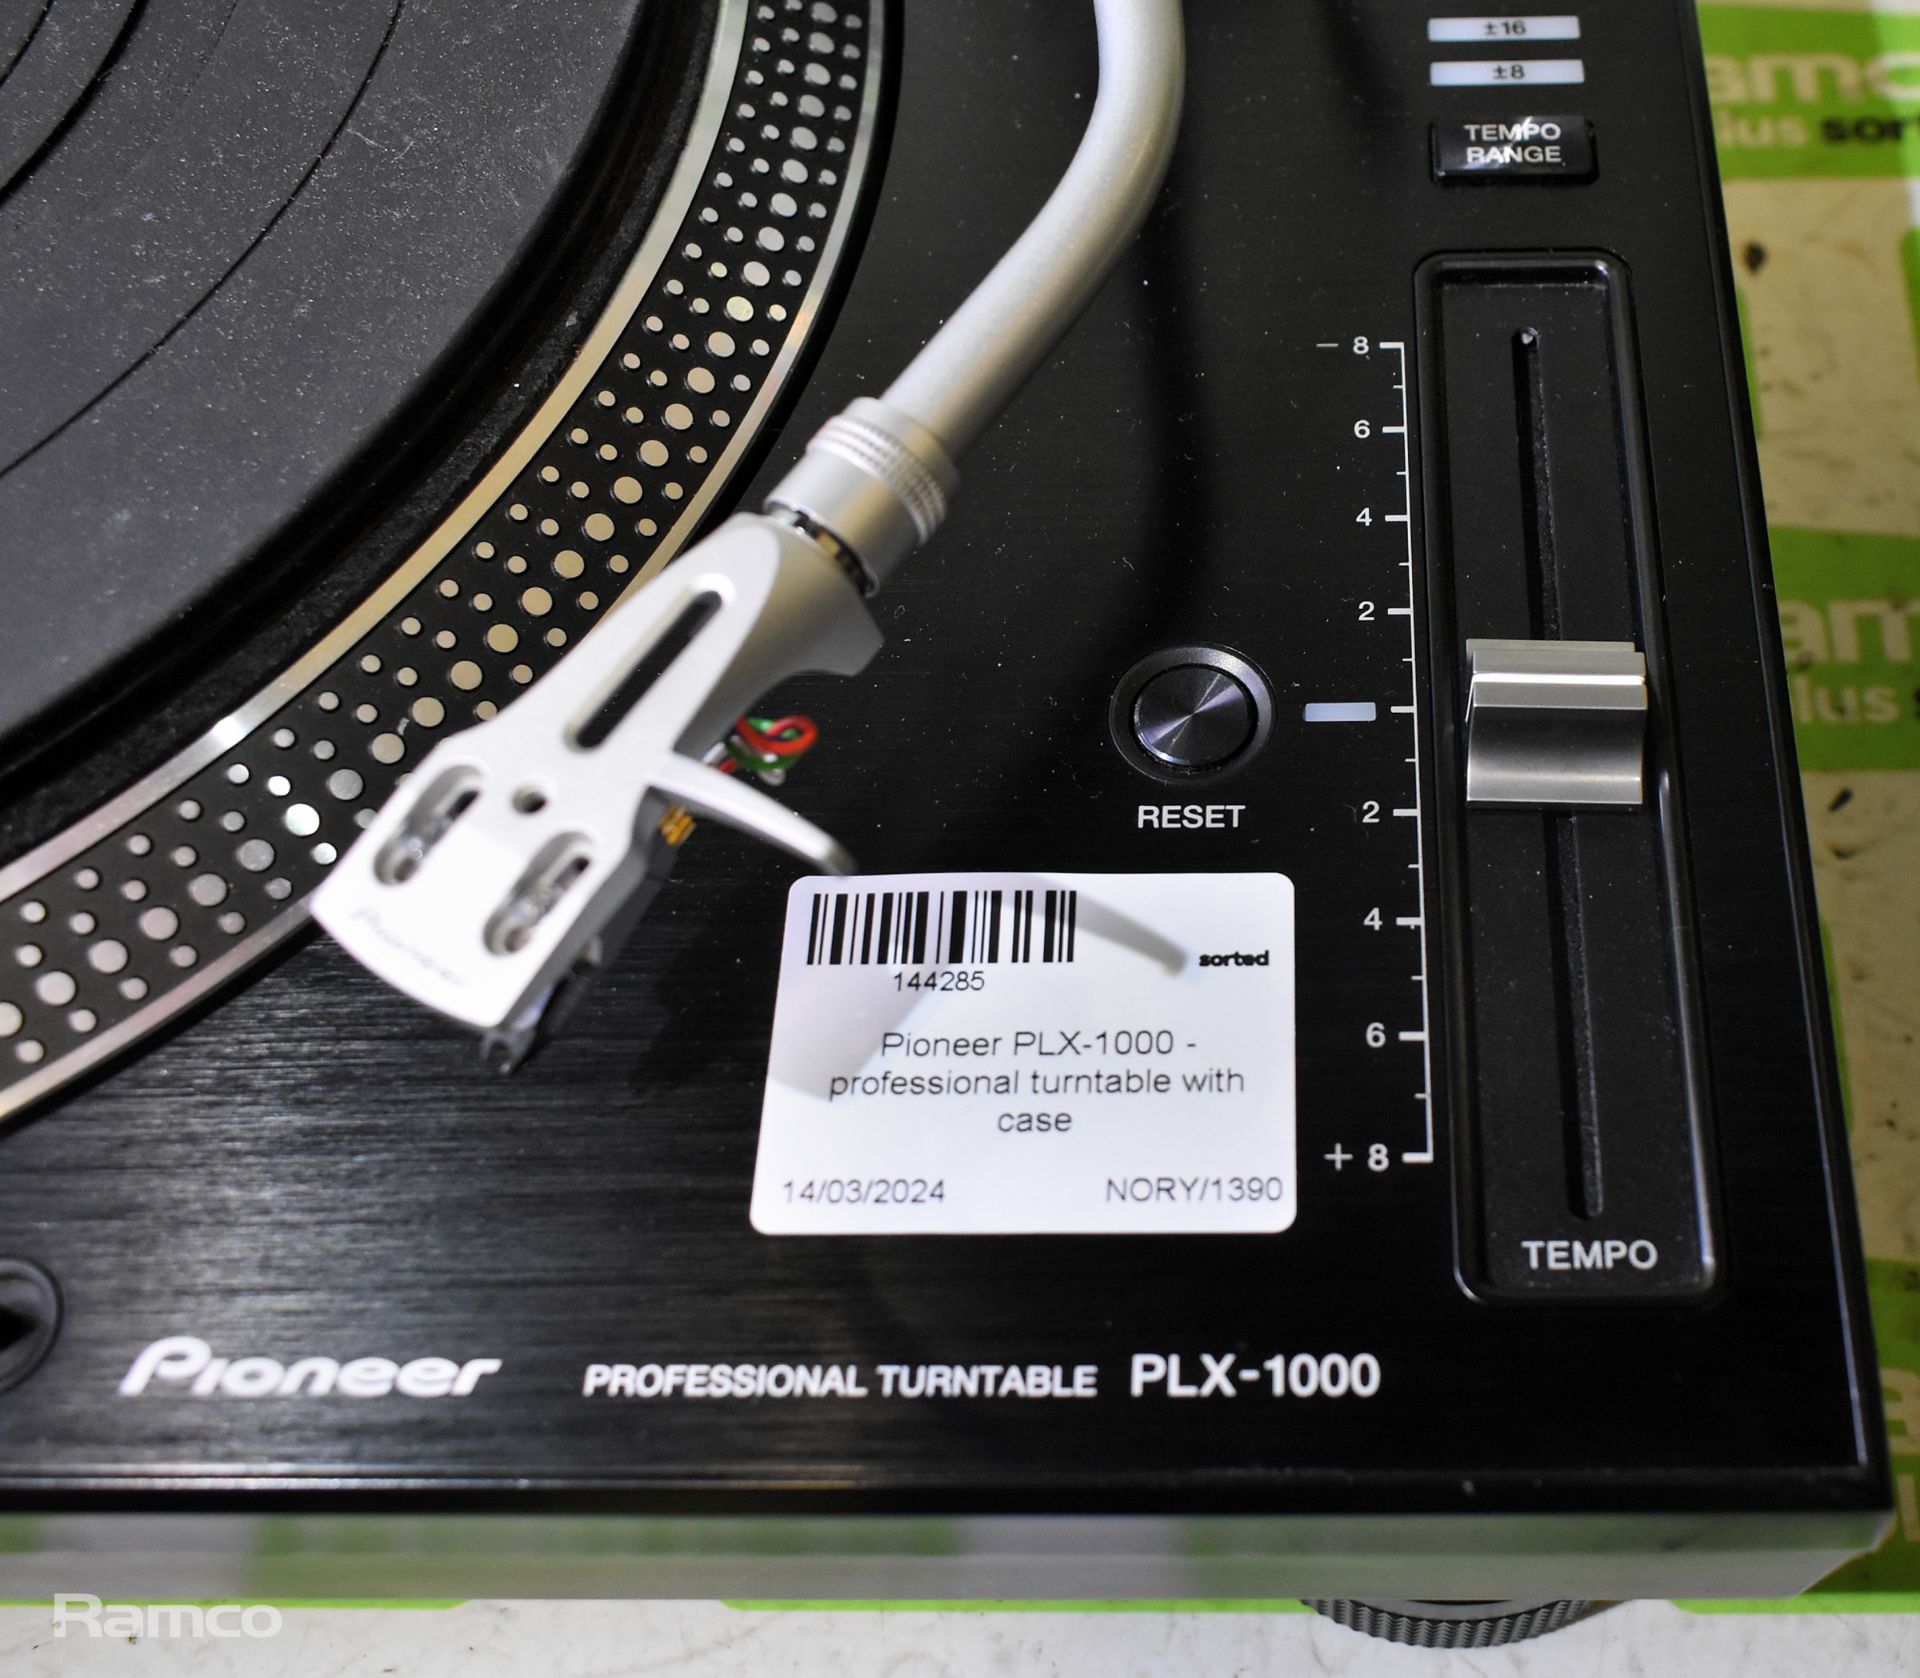 Pioneer PLX-1000 professional turntable with case - Image 4 of 15